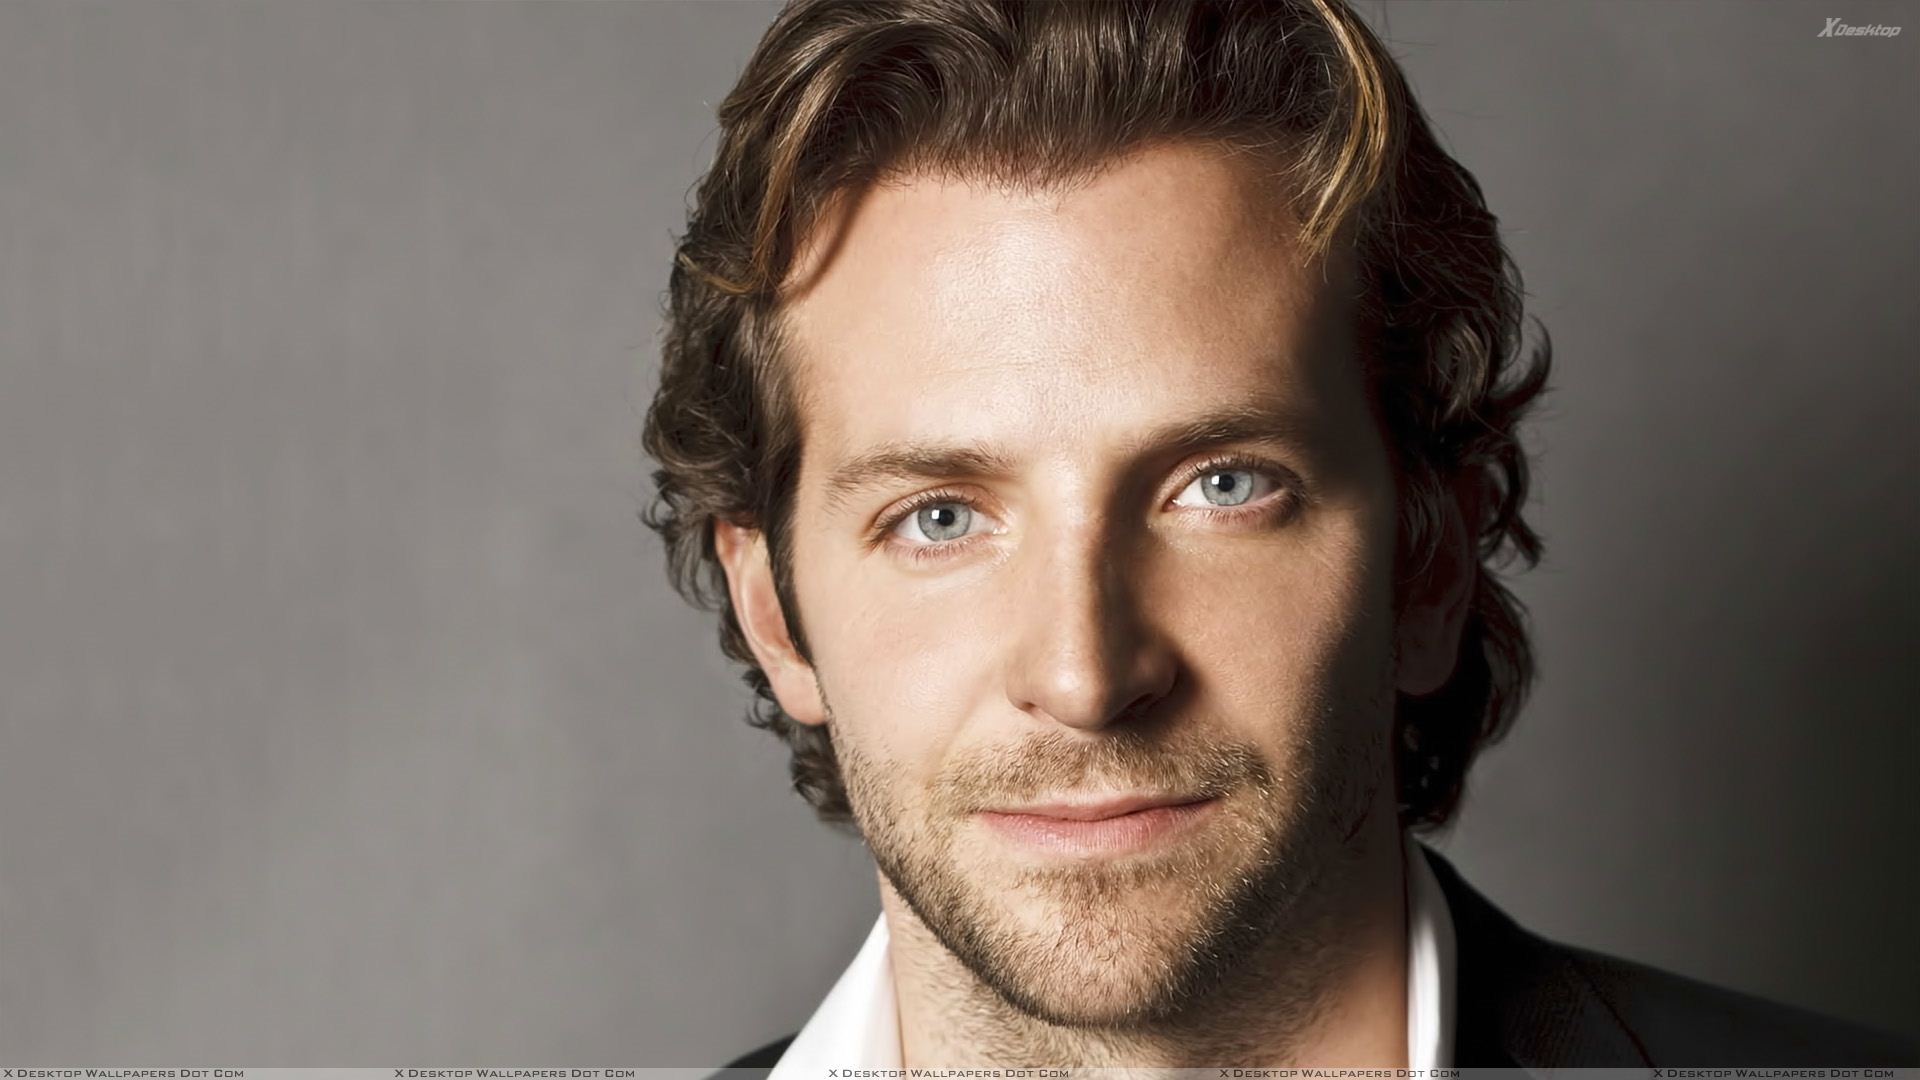 Bradley Cooper Wallpapers Photos Images in HD 1920x1080